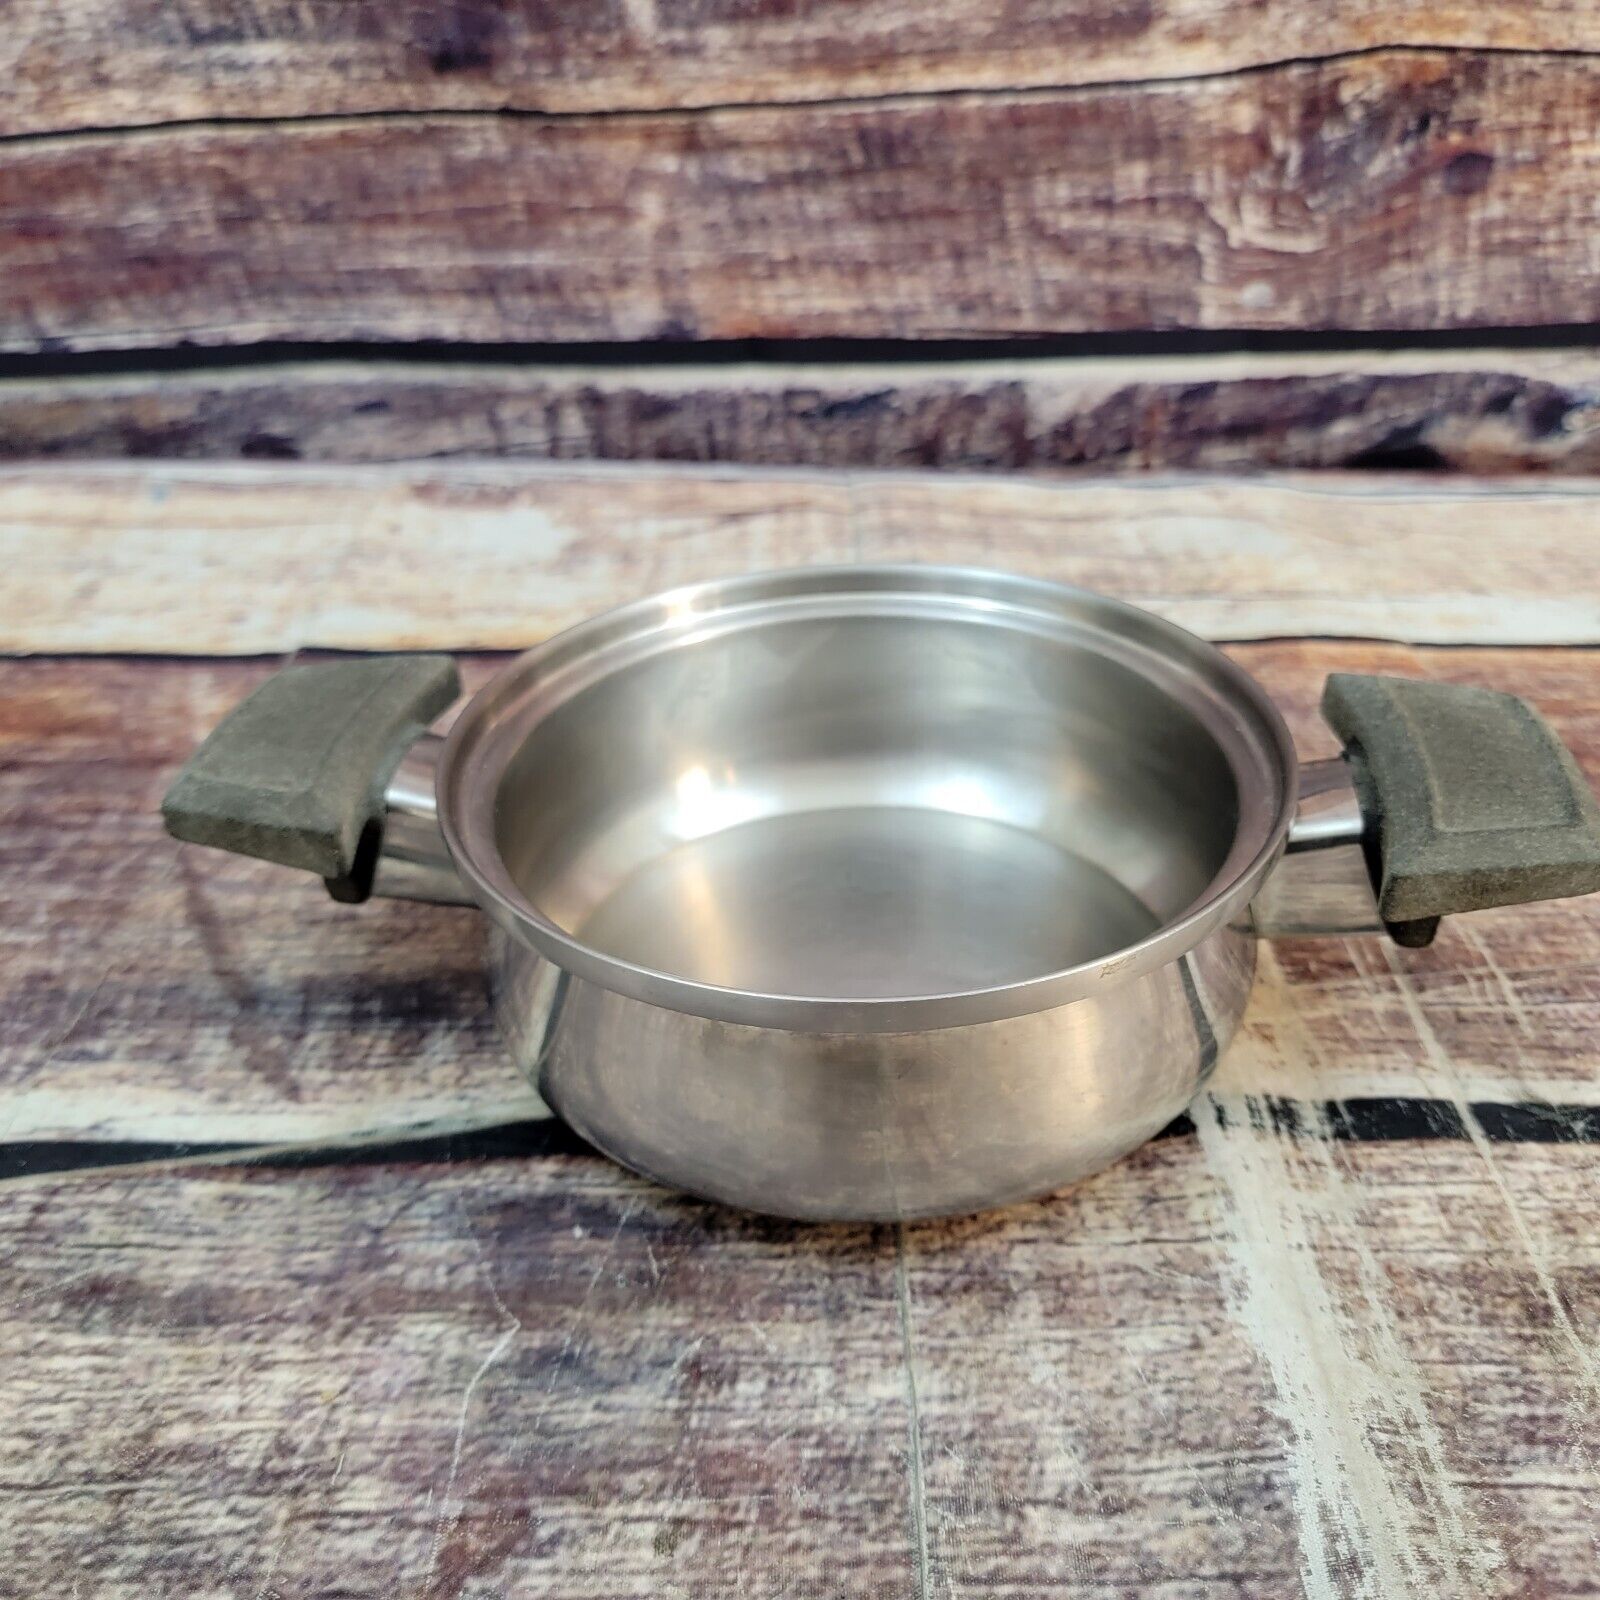 Vintage Royal Queen 6.5” Pot Pan Cookware Stainless Steel No Lid USA